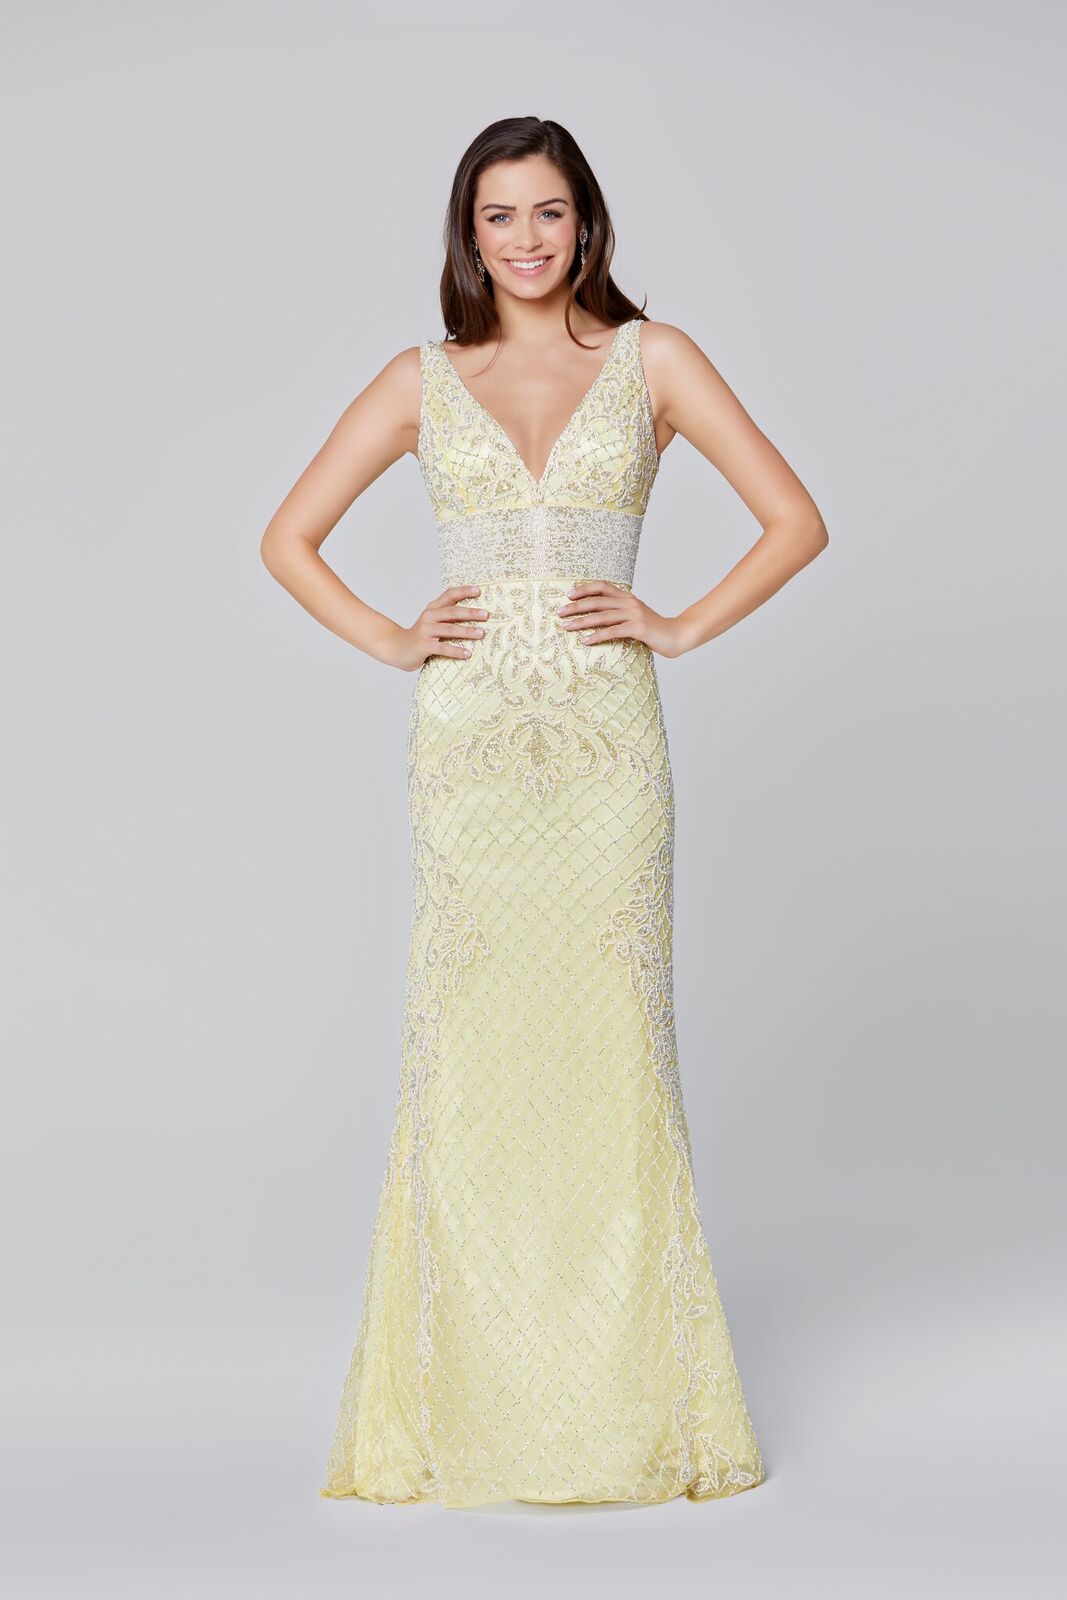 Primavera Couture 3425 is a Yellow Beaded Prom Dress, Pageant Gown, Wedding Dress & Formal Evening Wear gown. This is a fully beaded prom dress with a v neckline and horizontal beaded high waistline.    Yellow  size 4